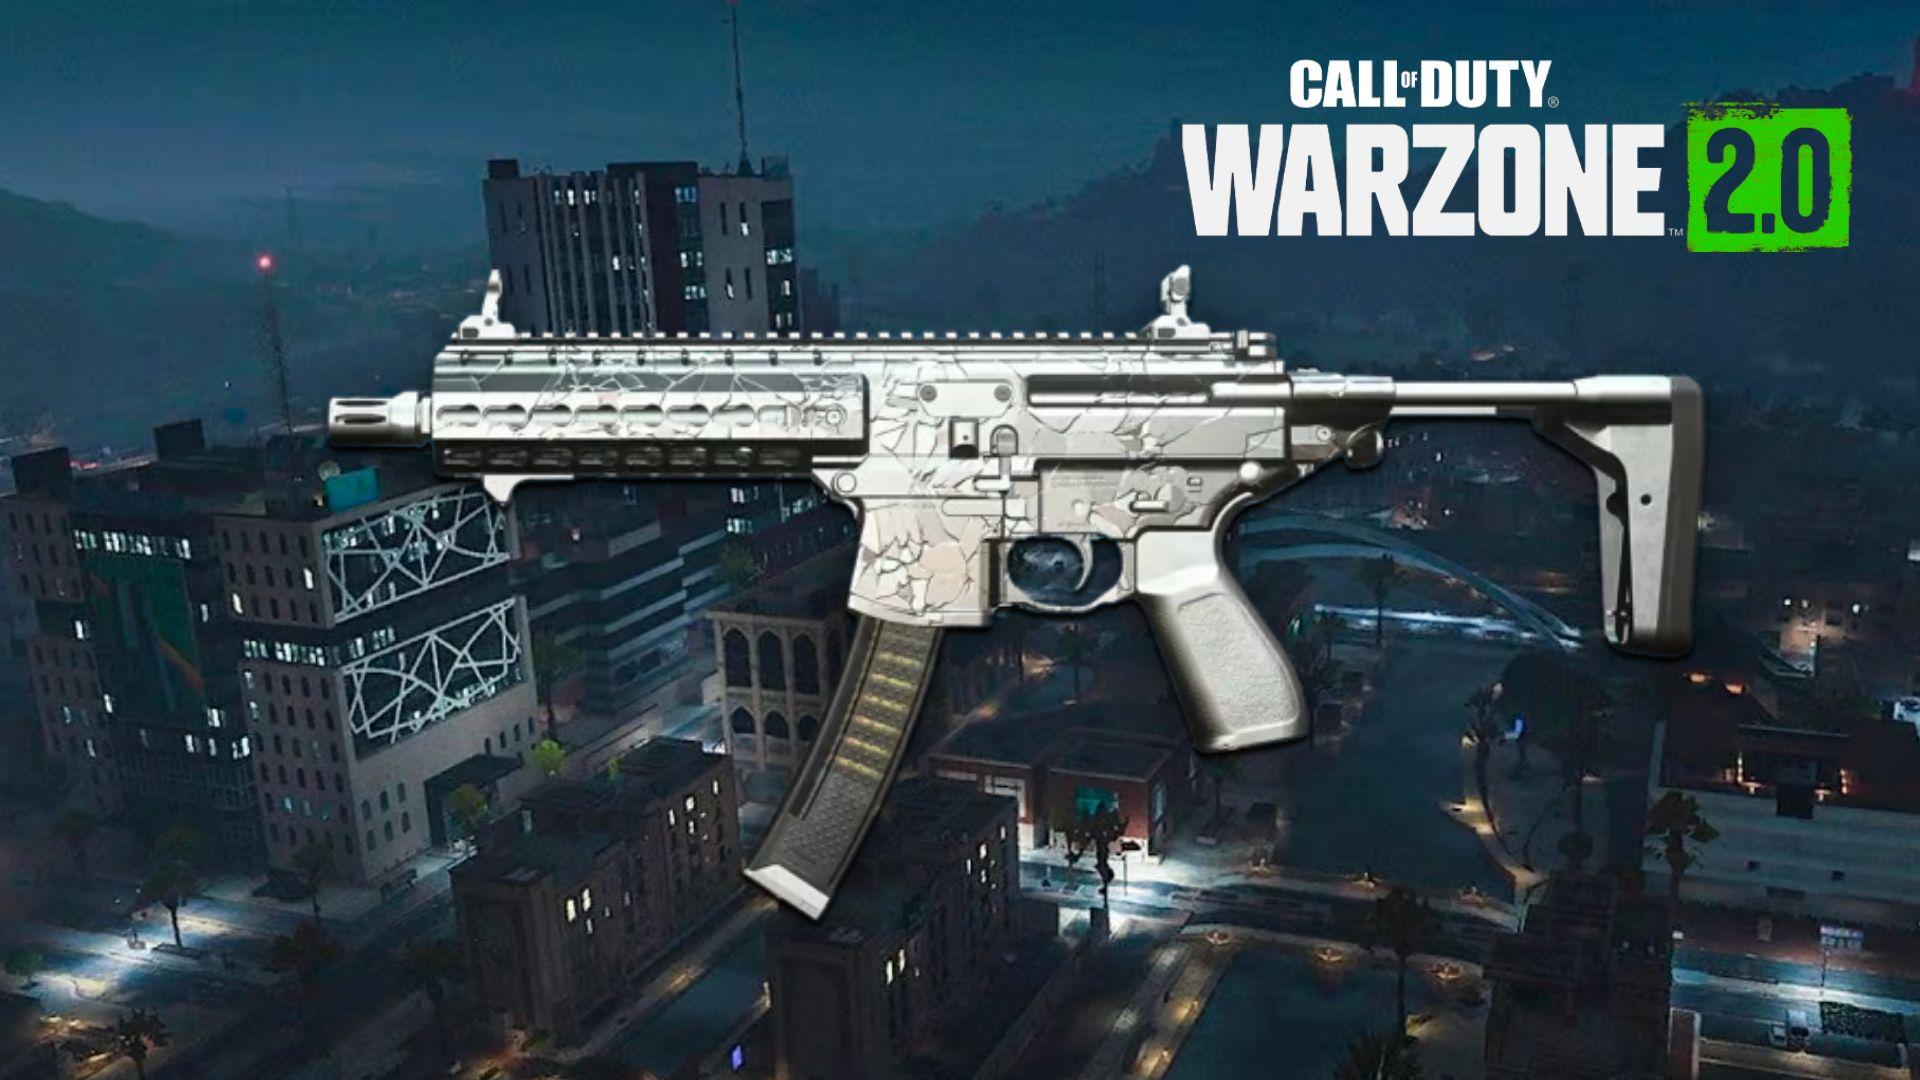 Warzone 2 meta dominated by Call of Duty SMG with fastest TTK